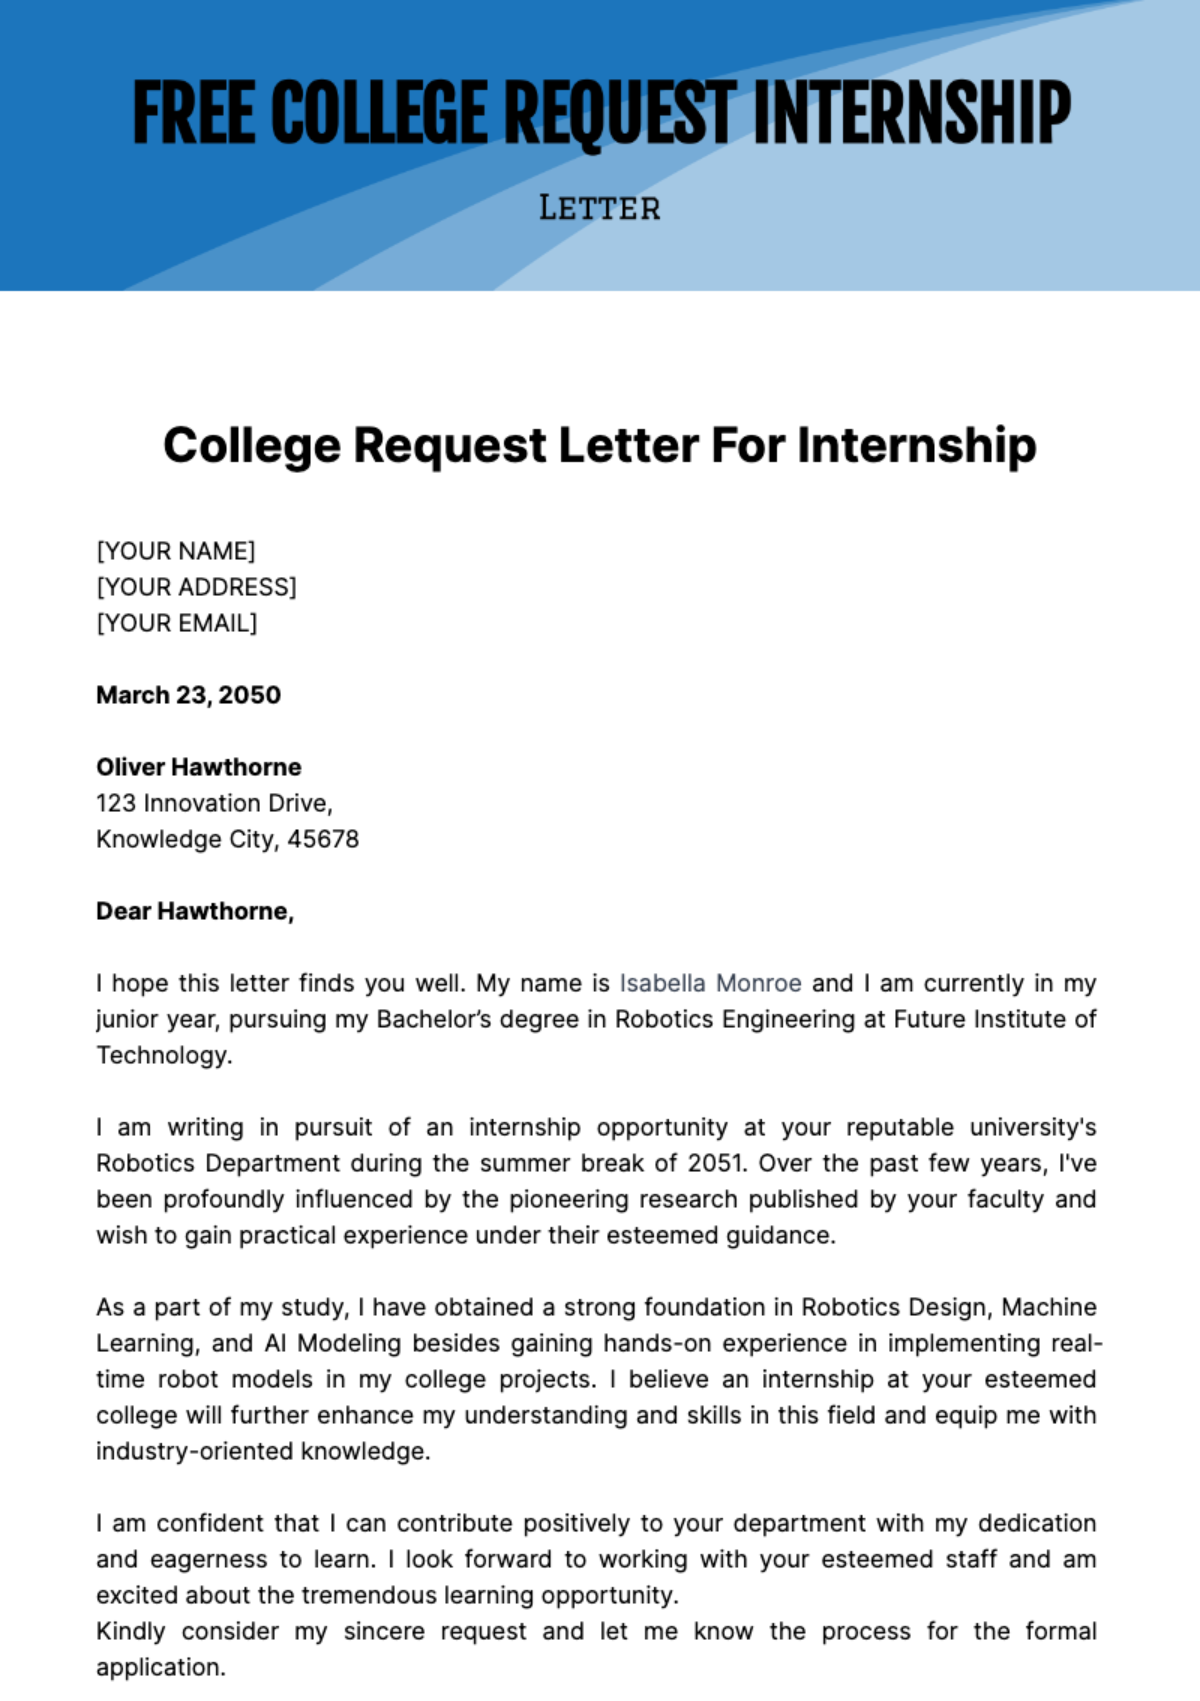 Free College Request Letter for Internship Template